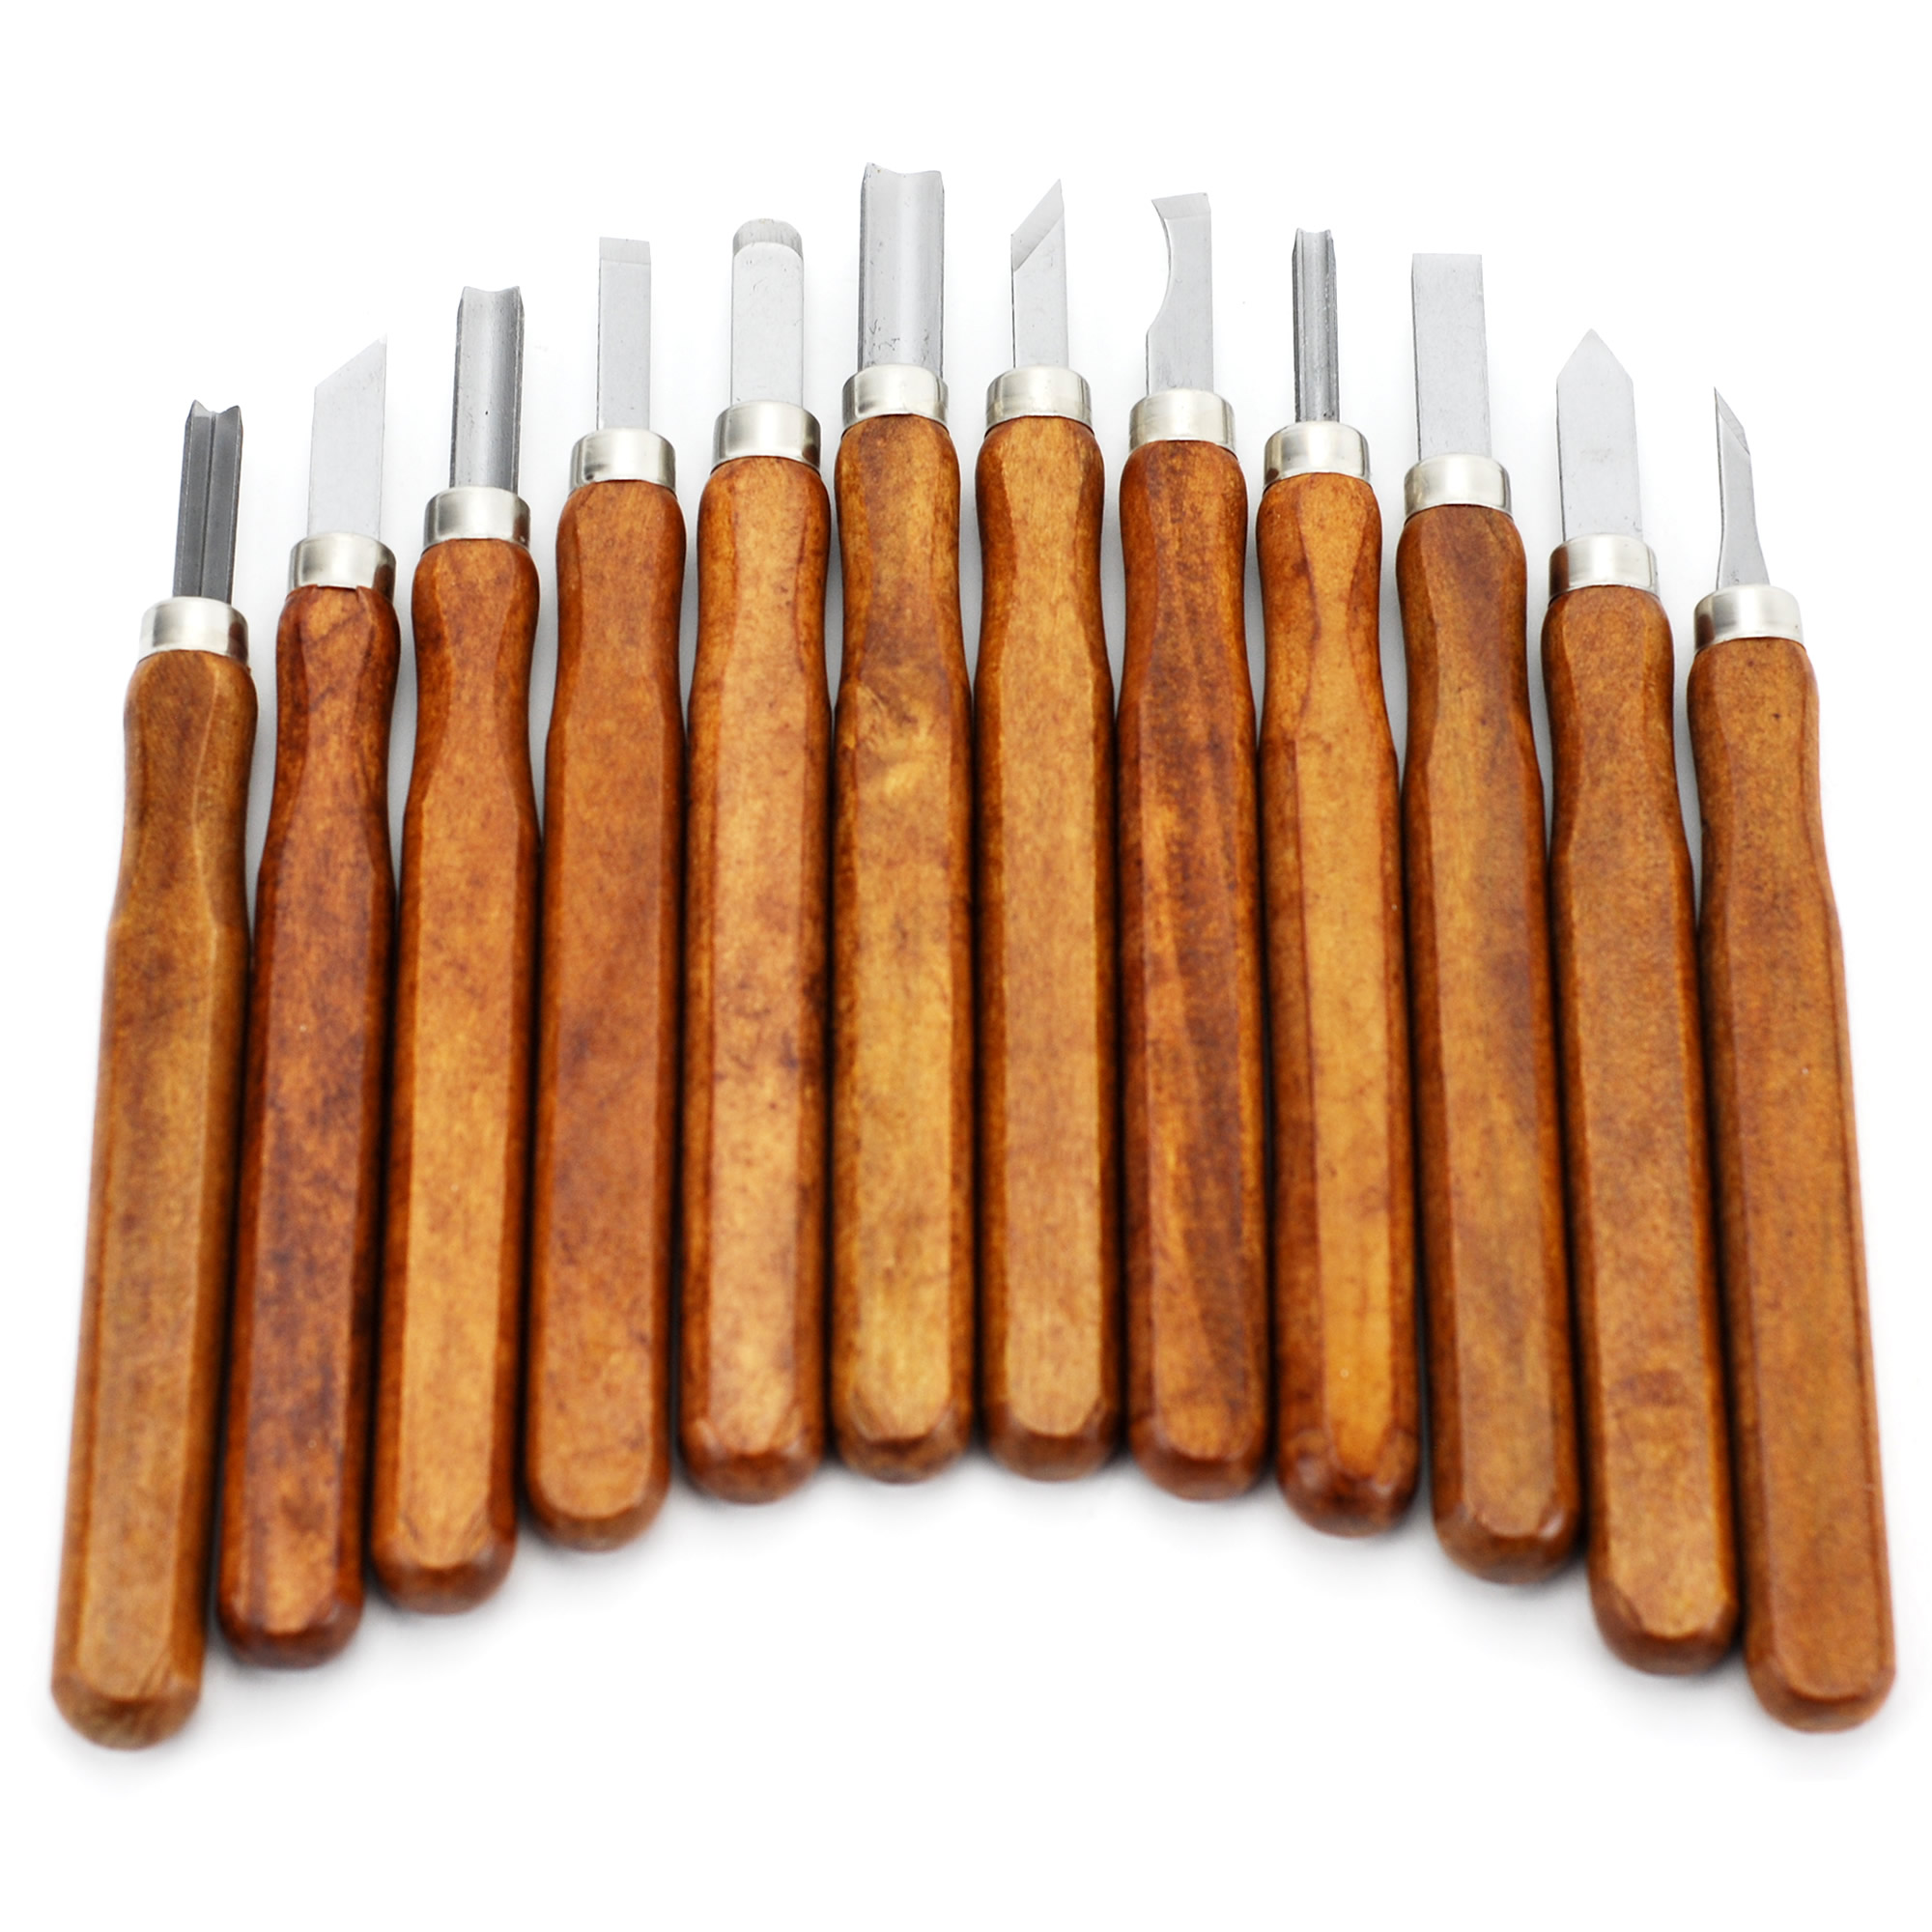 Wood Carving Starter Kit,12 Piece Wood Carving Knife Wood Carving ...